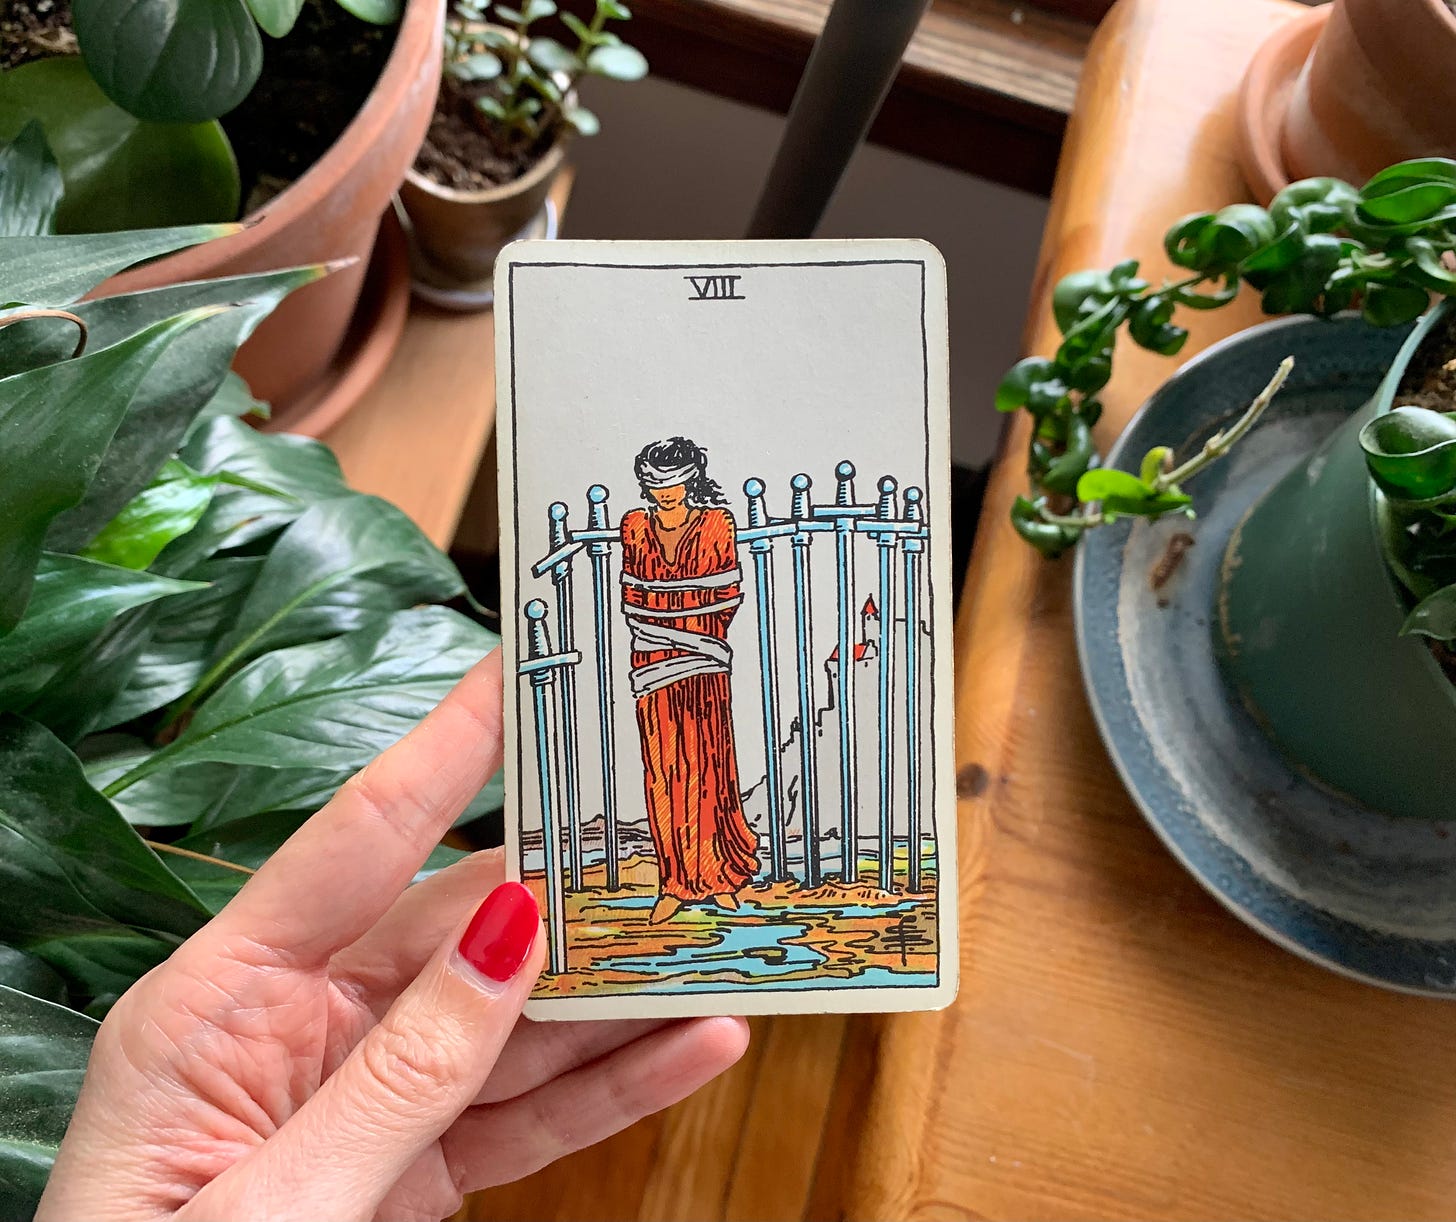 A hand is holding a tarot card, eight of swords by pamela colman smith for the rider waite smith tarot. In the image a person is wearing all red and tied around their arms and blindfolded. They are standing on a muddy ground, with eight swords in the ground surrounding them on the right and left but not back and front. In the distance behind them is a castle on a hill. Behind the card are some houseplants next to a window sill with light coming in.